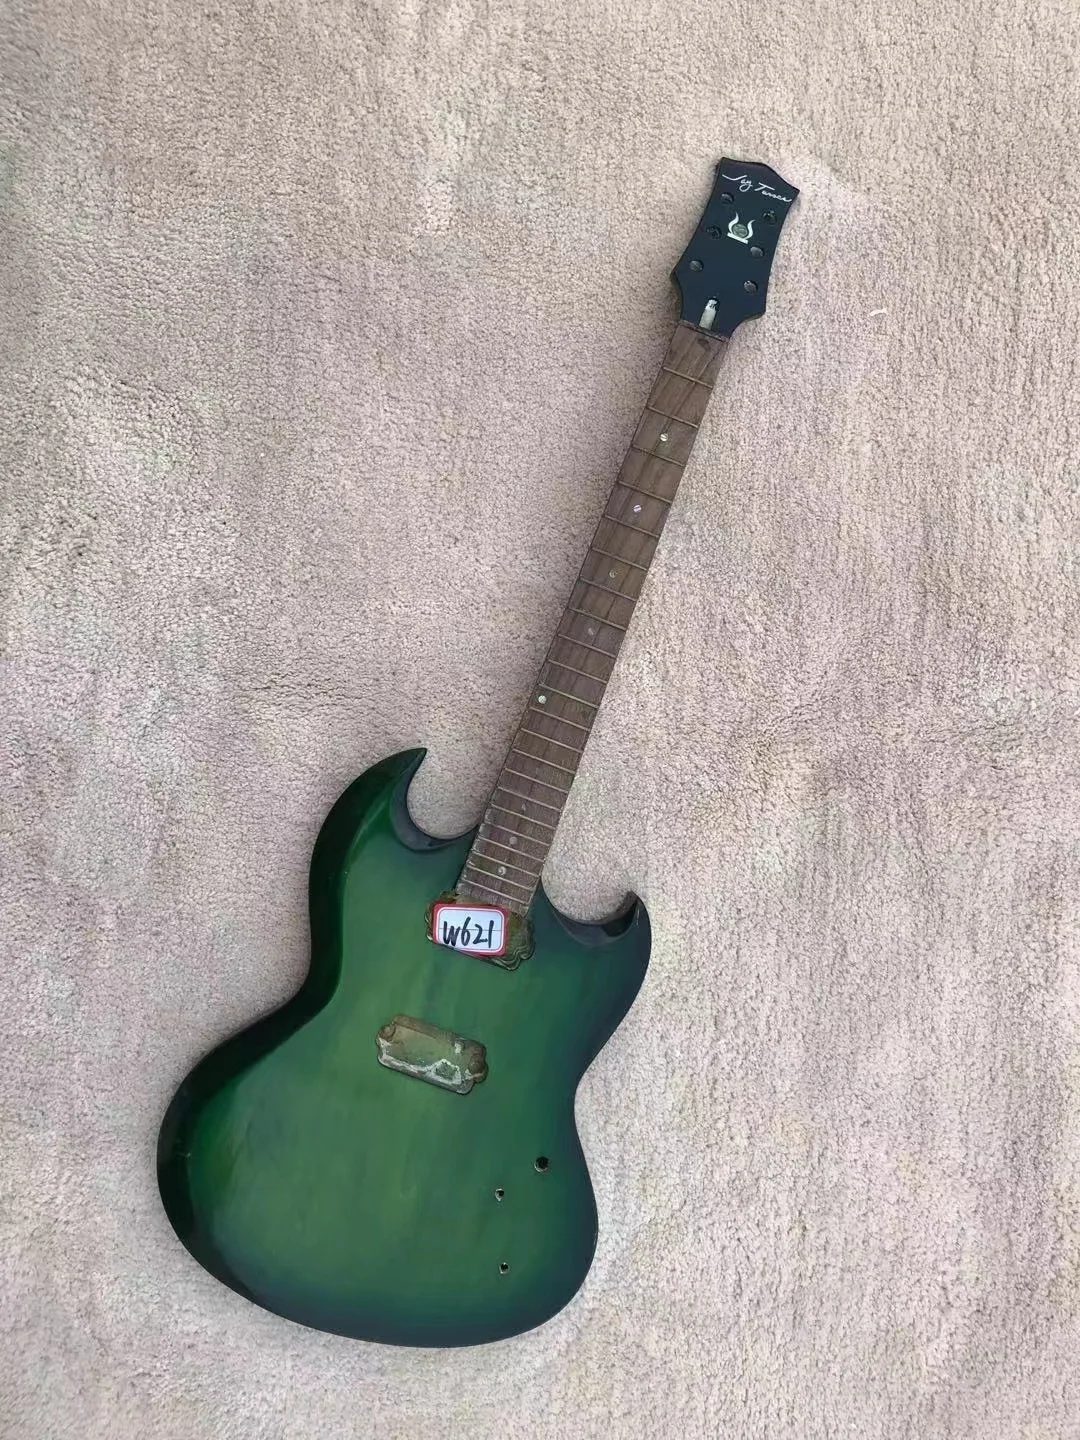 DIY (Not New) Custom Electric Guitar without Hardwares in Stock Discount Free Shipping W621